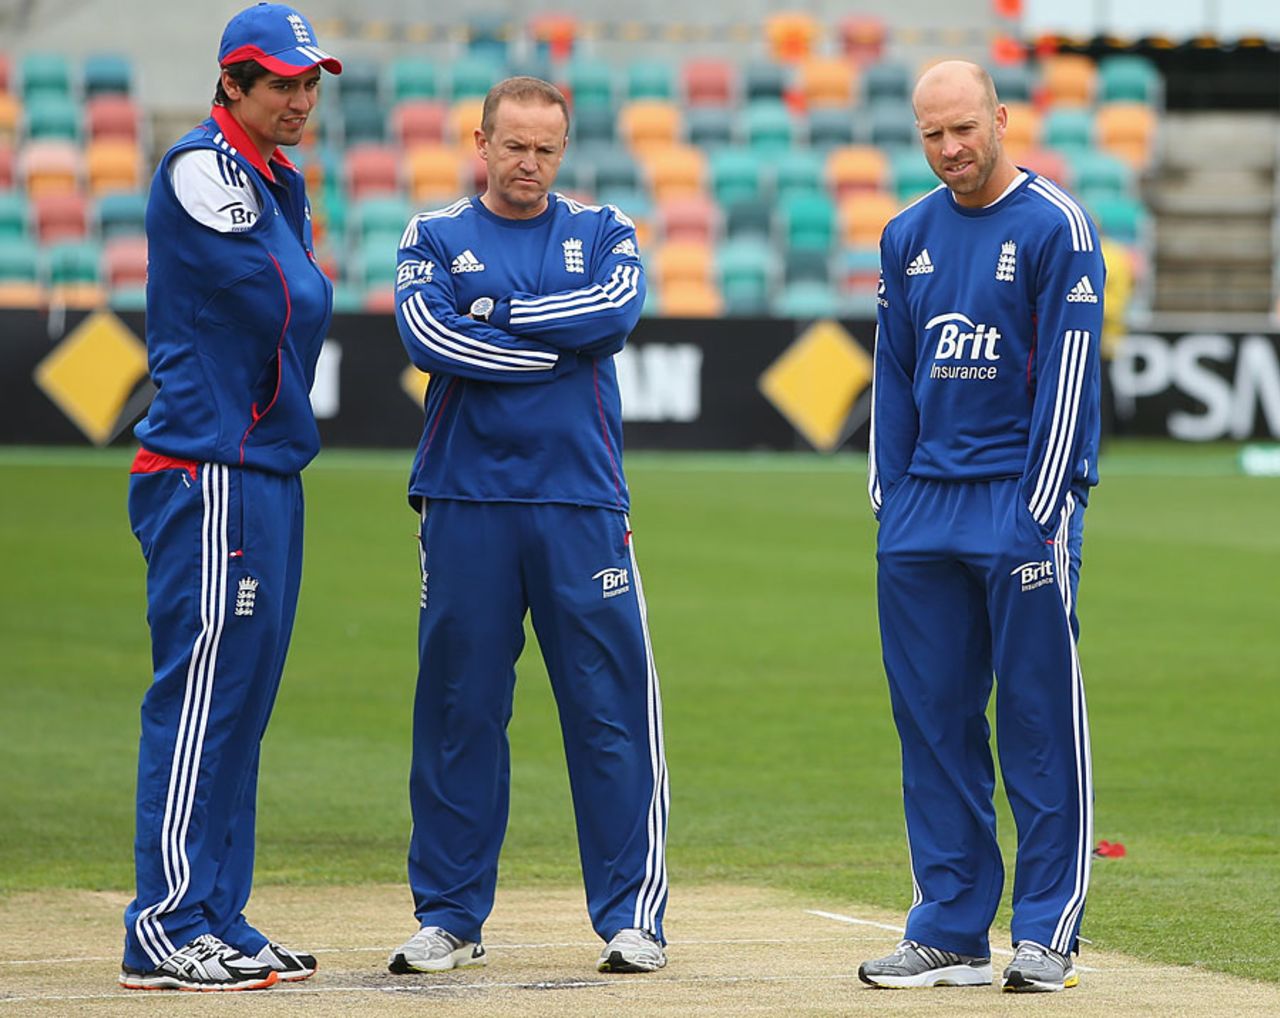 Alastair Cook, Andy Flower and Matt Prior inspect the damp, chilly scene, Australia A v England XI, Tour match, Hobart, 2nd day, November 7, 2013